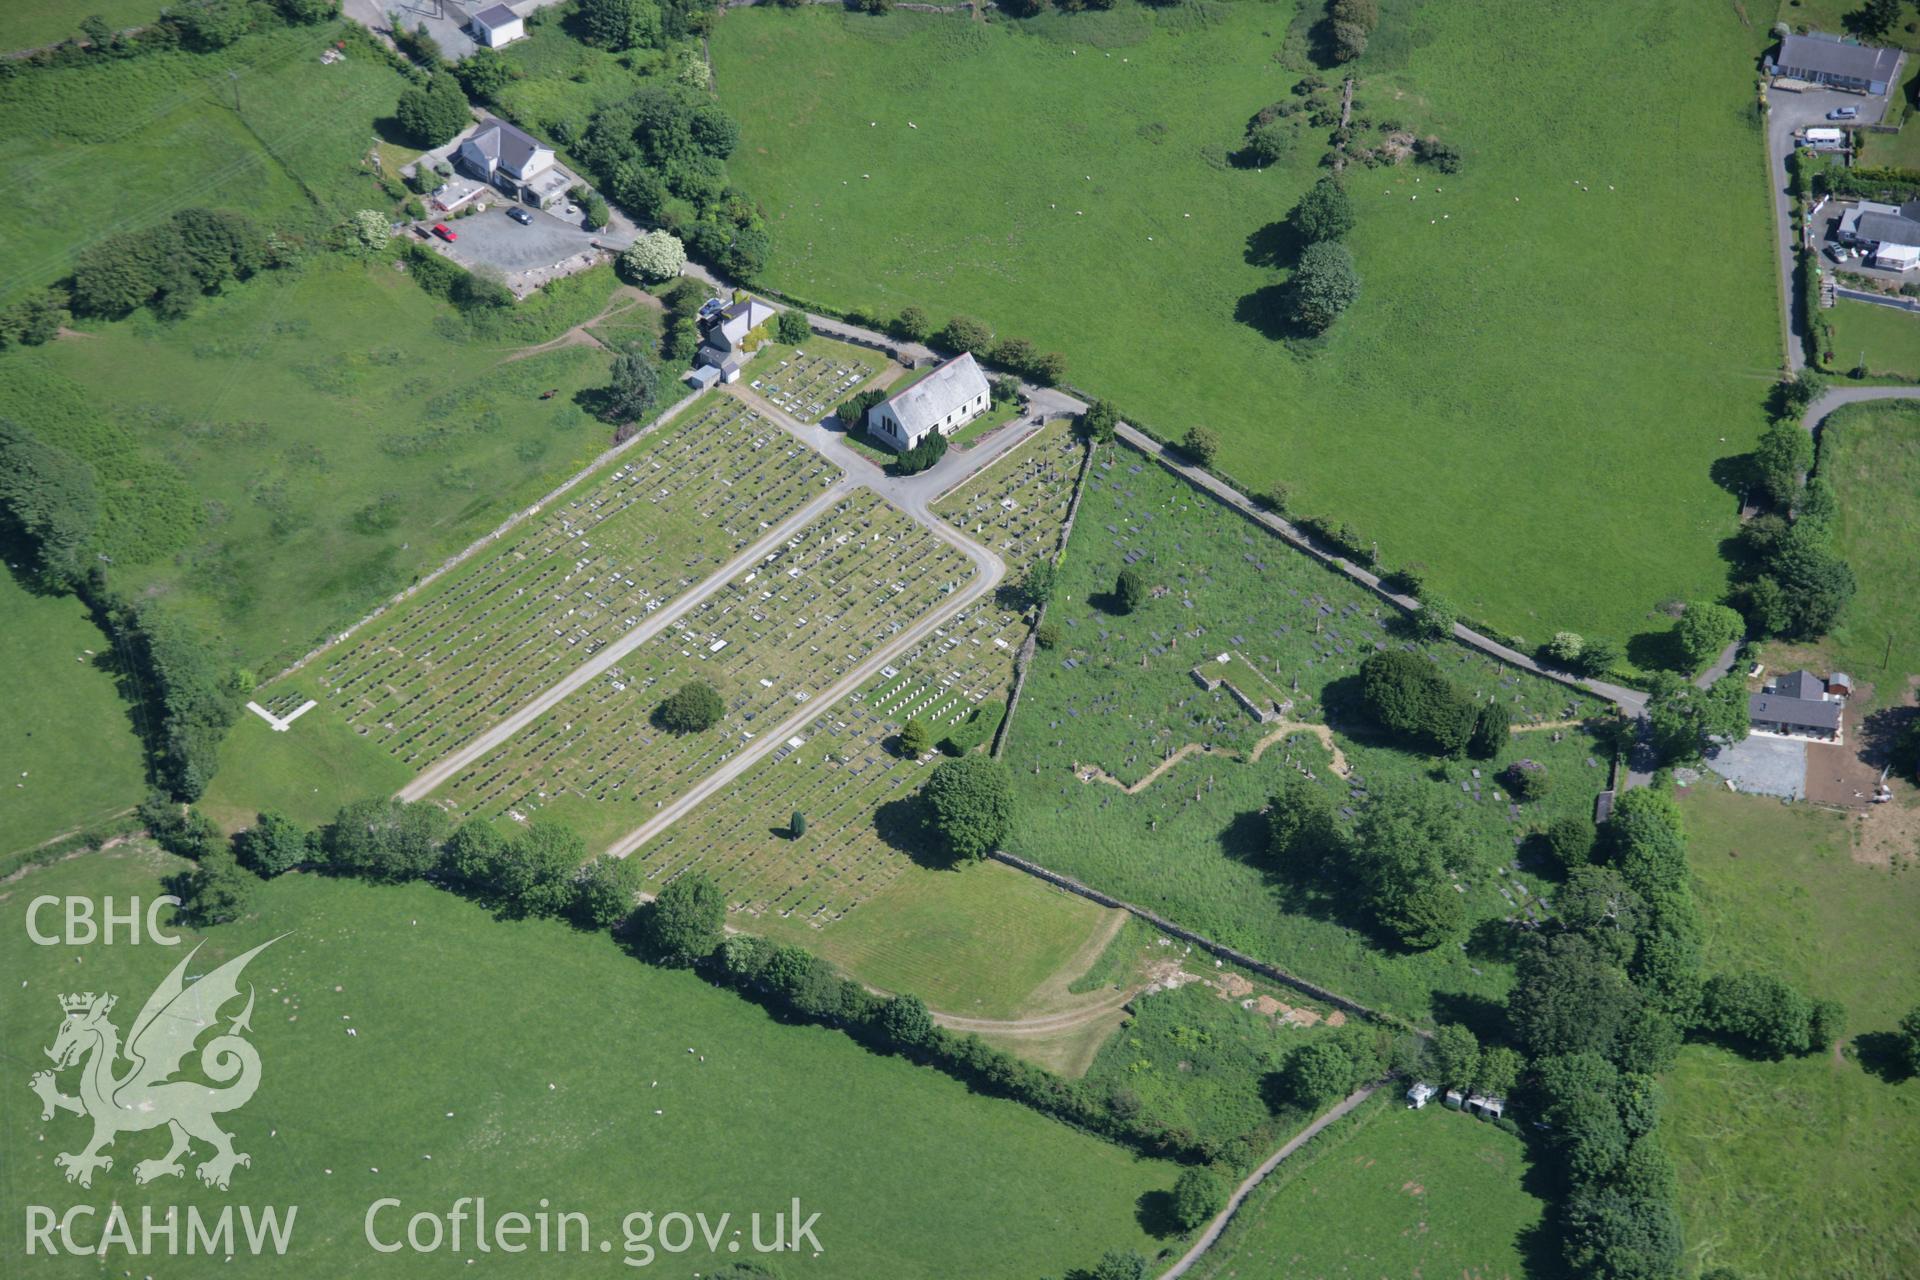 RCAHMW colour oblique aerial photograph of St Denio's Church Mortuary Chapel from the north-west. Taken on 14 June 2006 by Toby Driver.